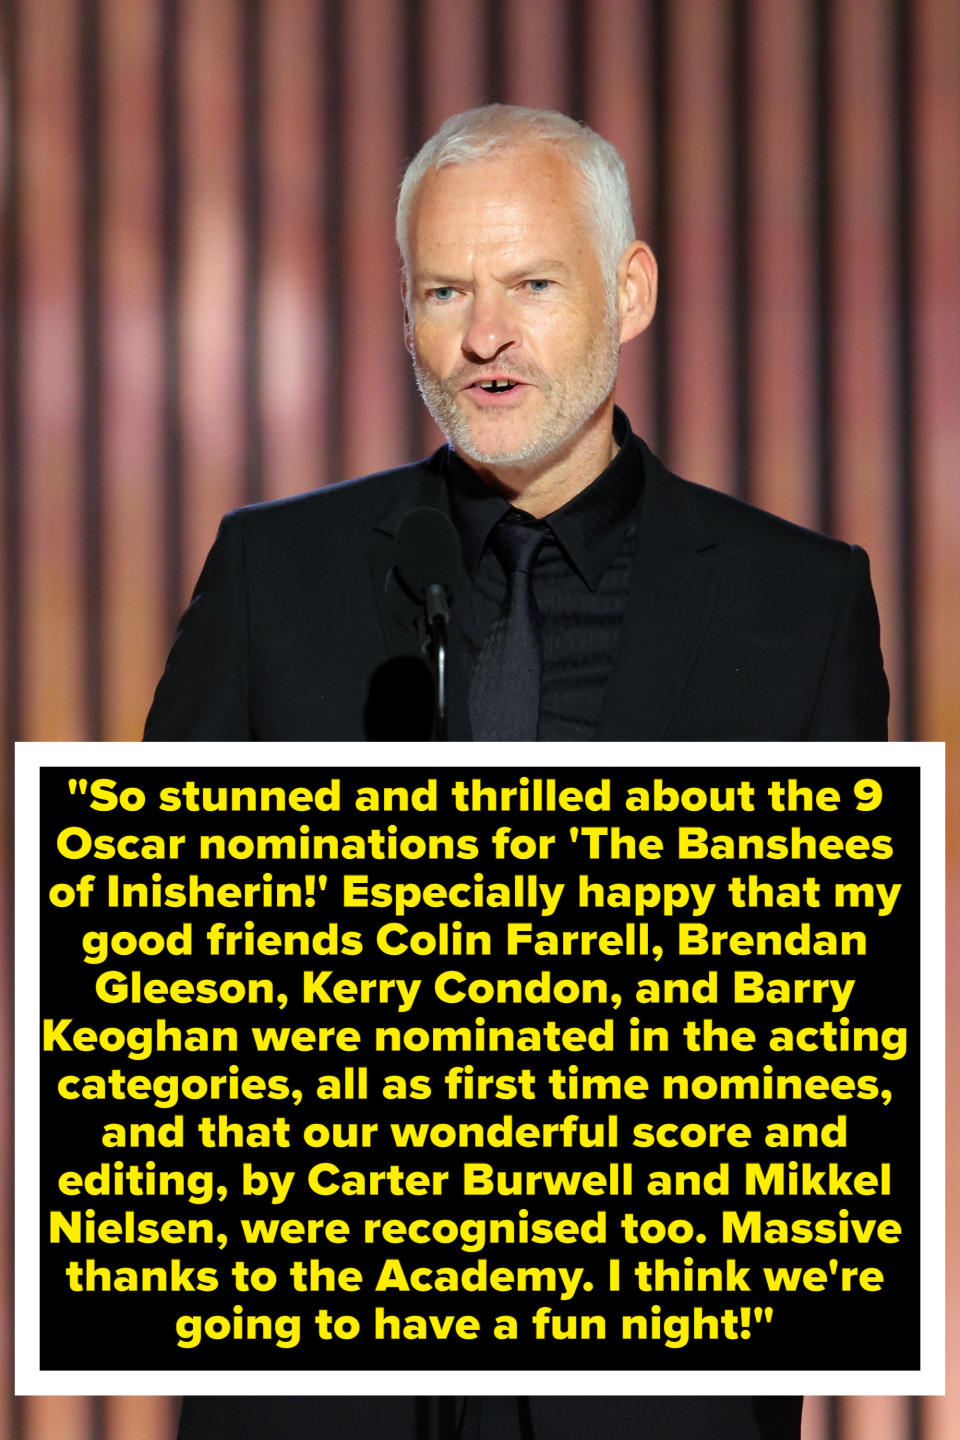 So stunned and thrilled about the 9 Oscar nominations for 'The Banshees of Inisherin!'